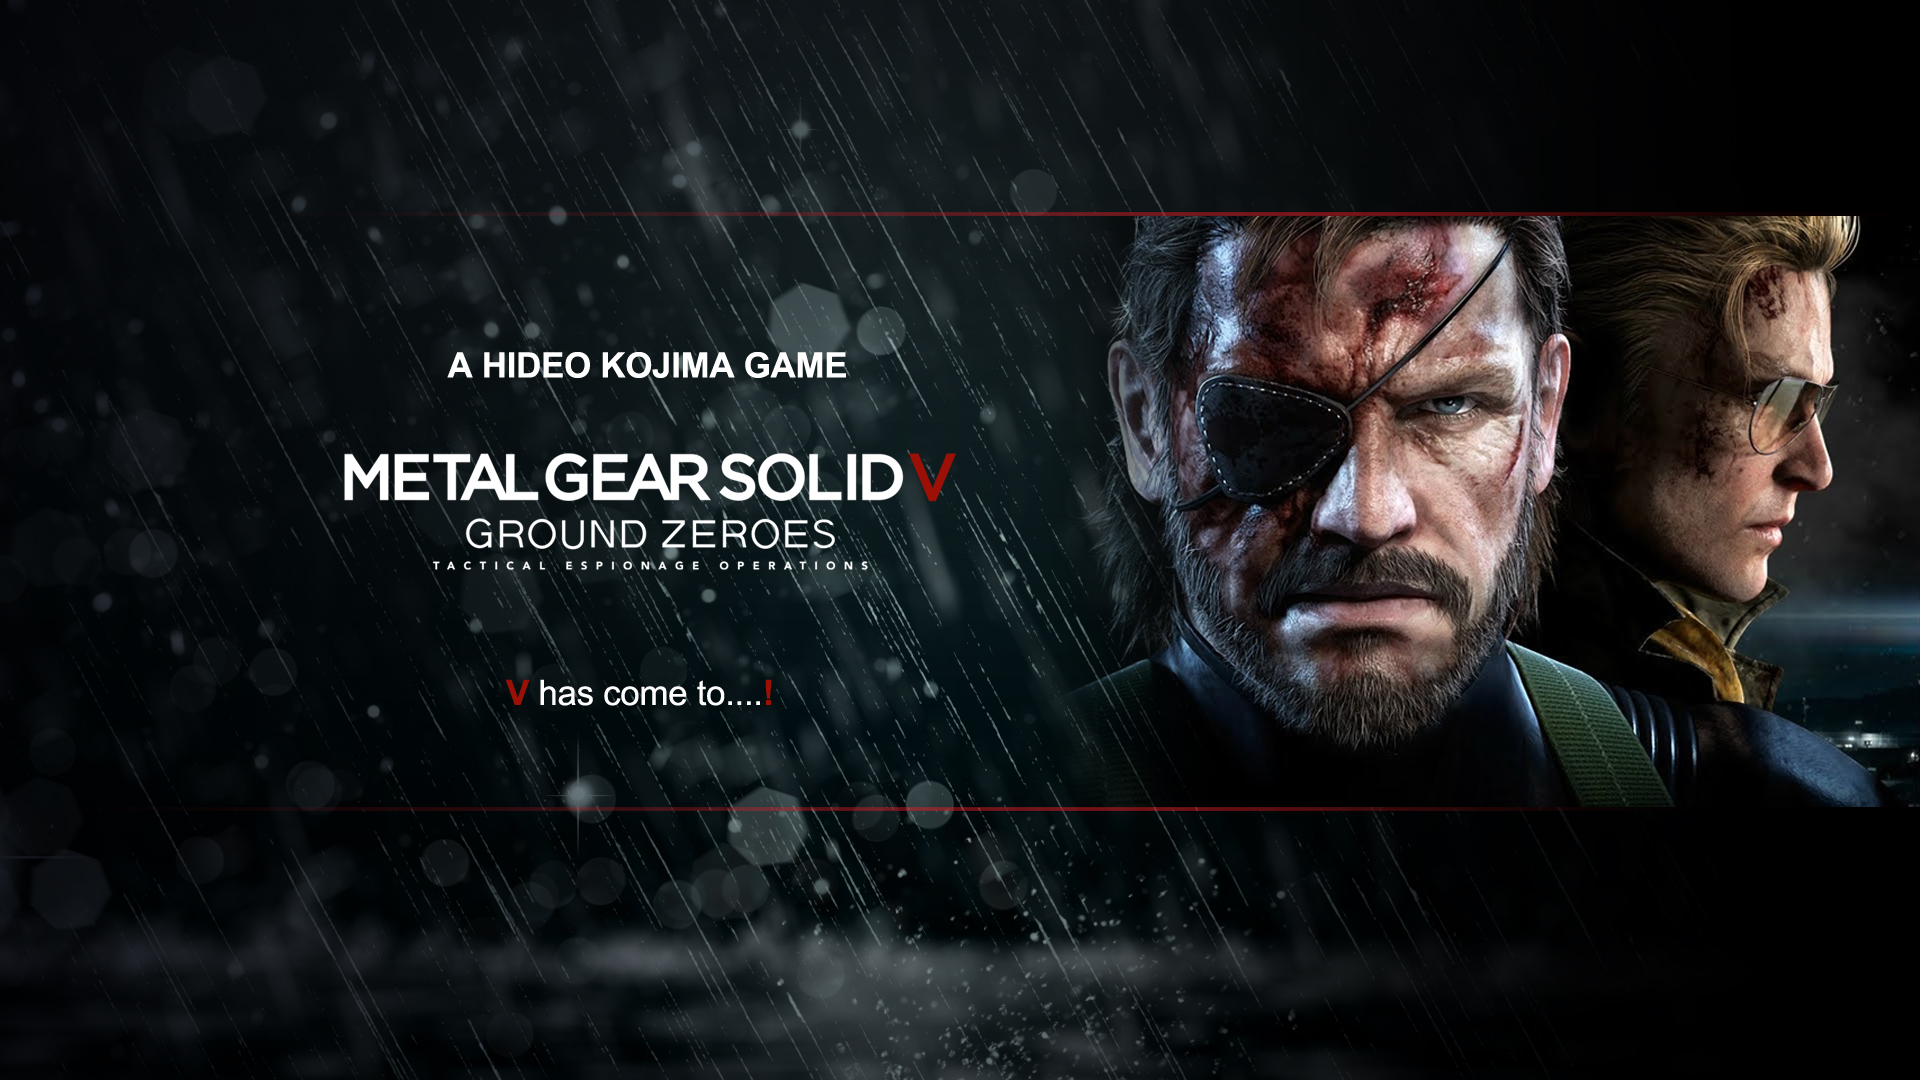 Free Download Mgs 5 Wallpaper 19x1080 For Your Desktop Mobile Tablet Explore 46 Mgs5 Wallpaper Metal Gear Solid Desktop Wallpaper Metal Gear Solid V Wallpapers Mgs5 Iphone Wallpaper